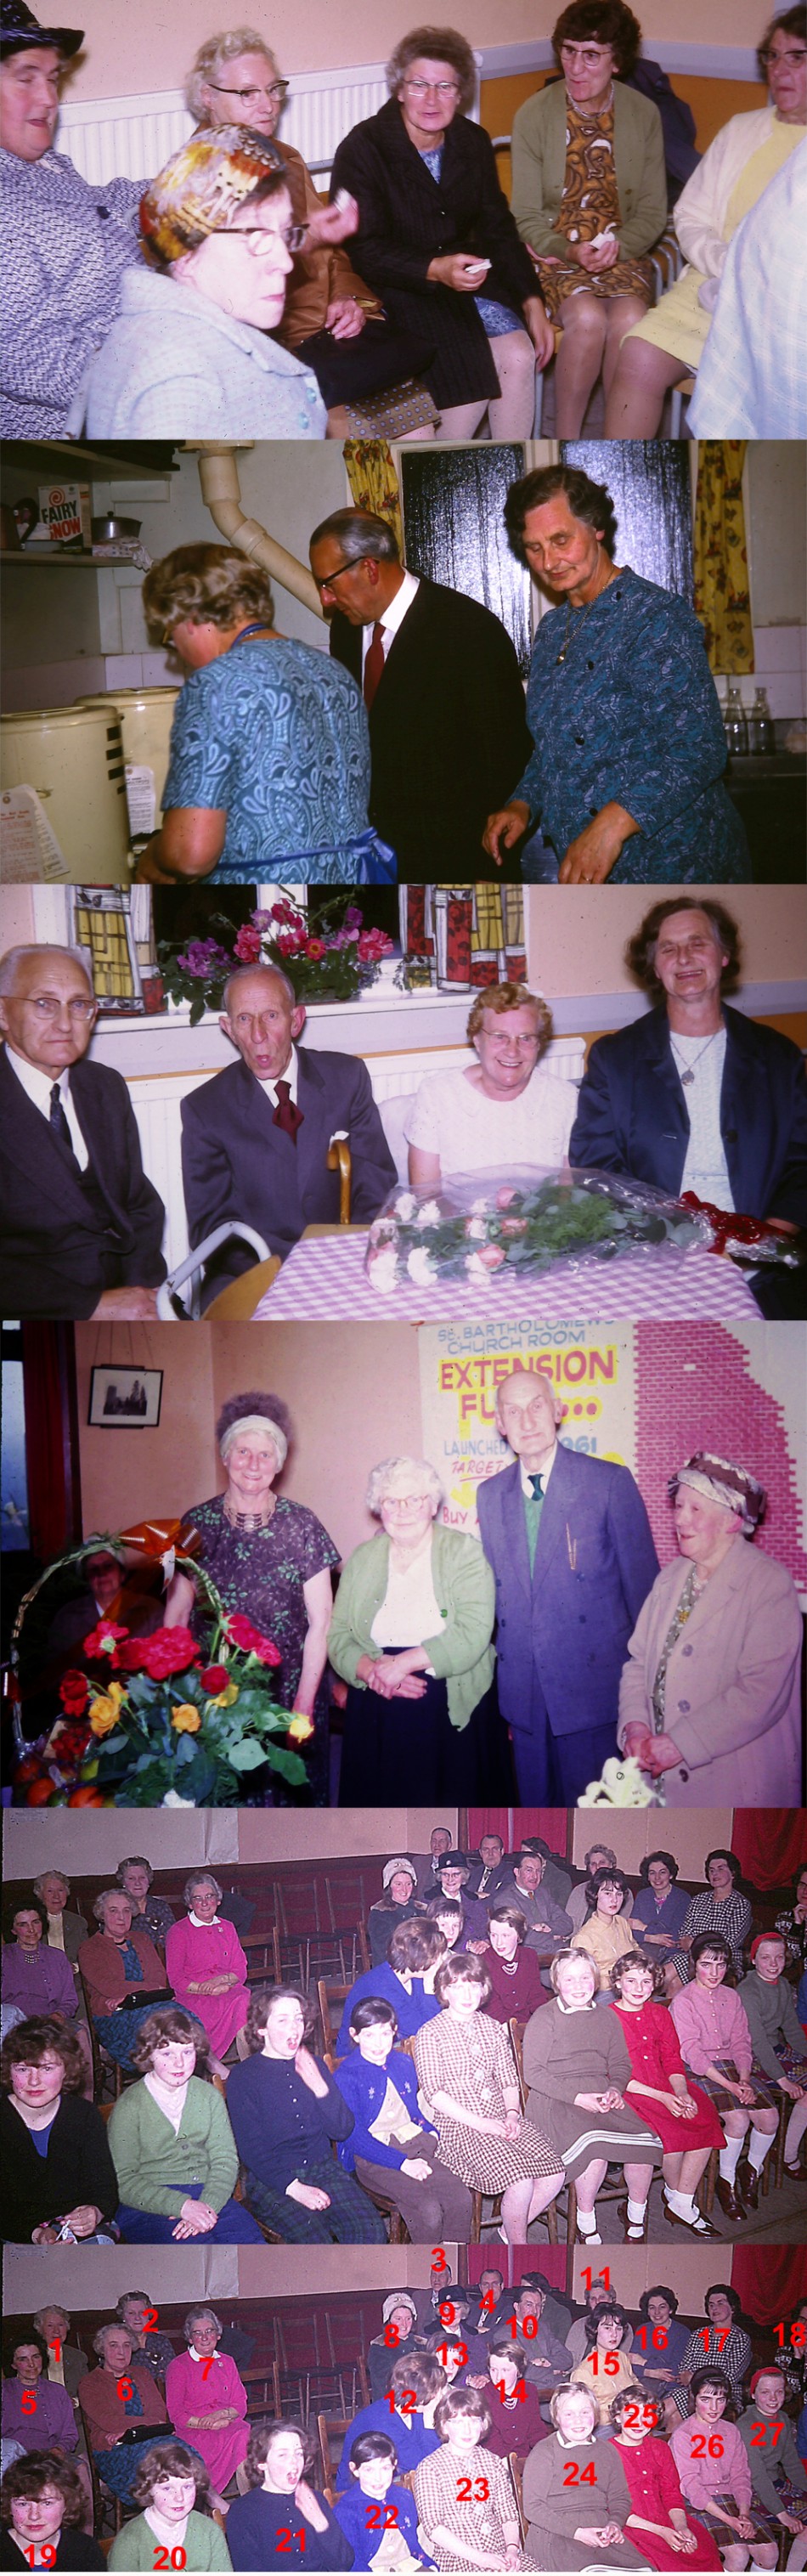 Social events in the Church Rooms, 1960s and 1970s